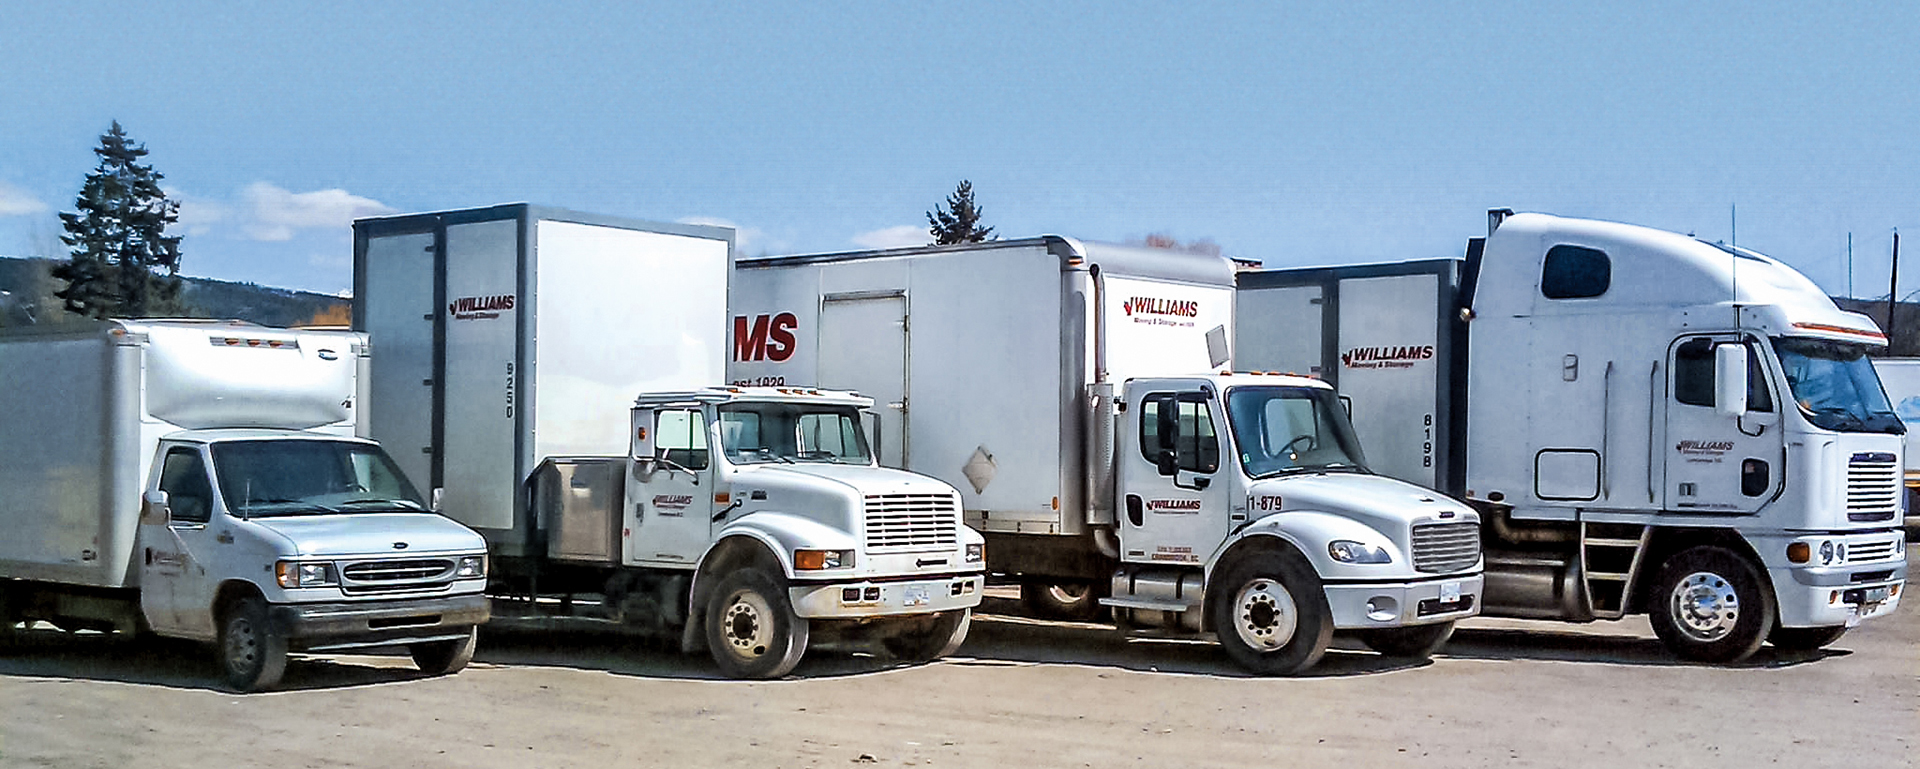 Moving trucks parked at Williams Moving & Storage in Cranbrook 